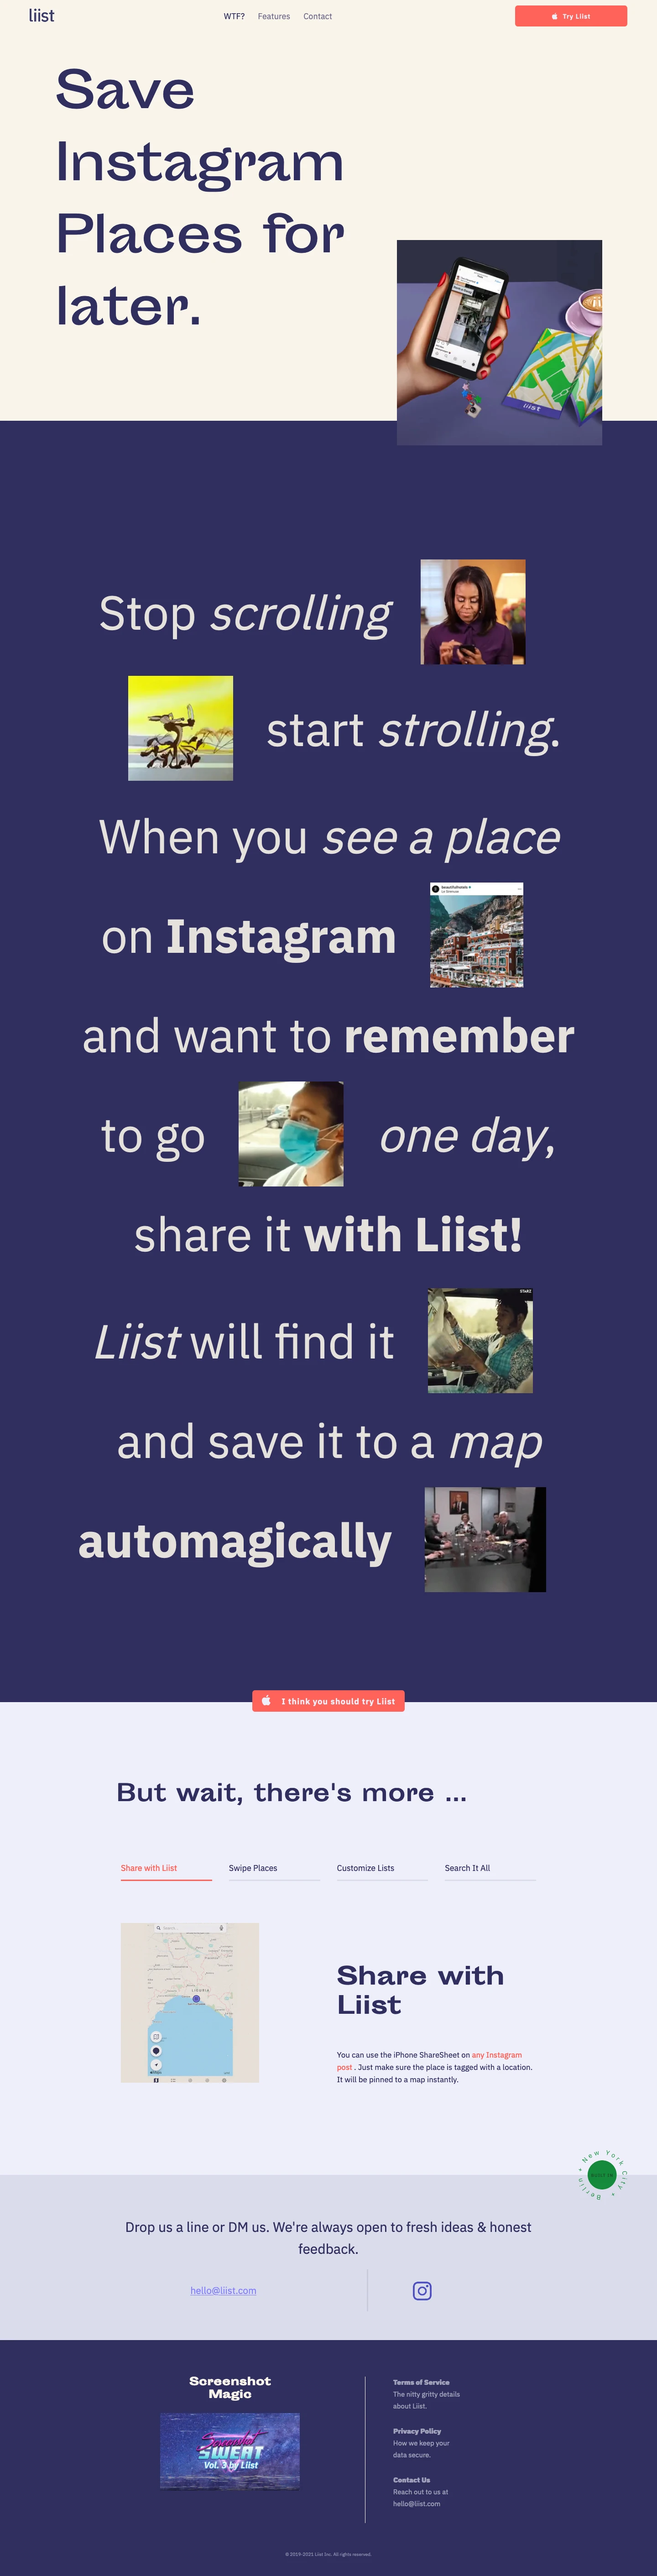 Liist Landing Page Example: Liist is the better way of saving places you discover on Instagram. Simply take a screenshot of a post or DM it to Liist - we’ll save it to a map for you instantly. Sounds cool? Download Liist!